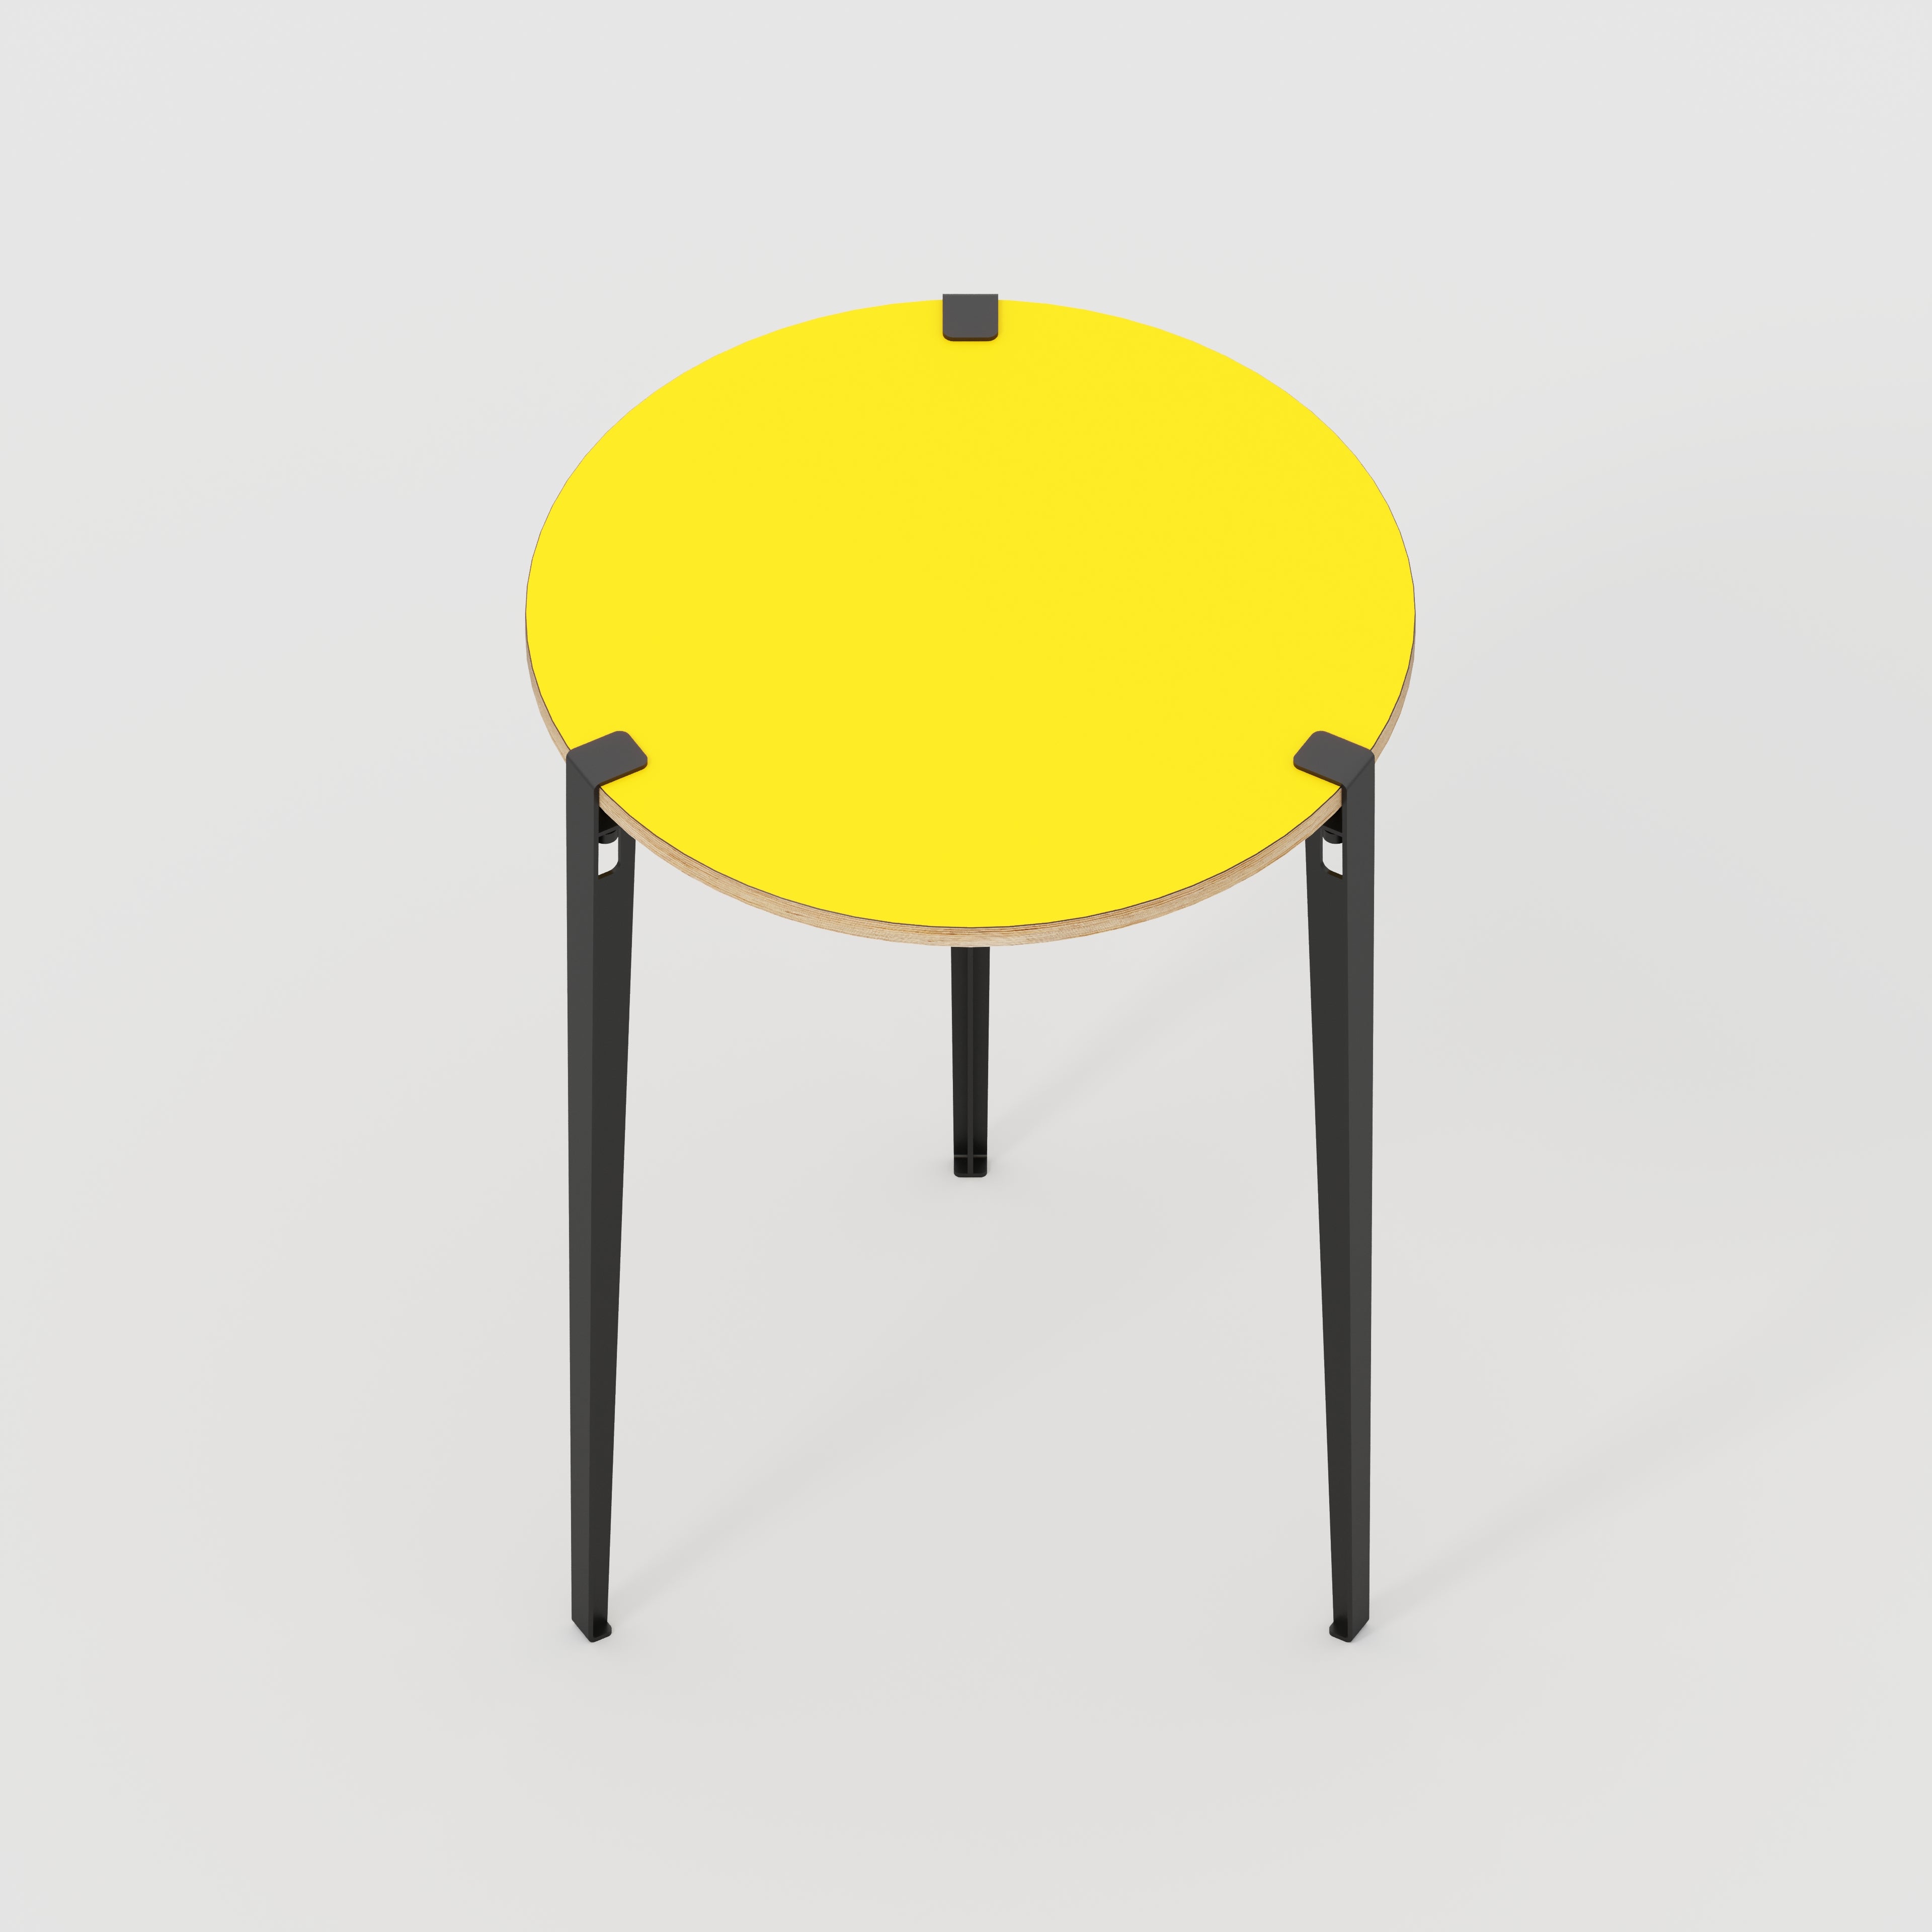 Round Table with Black Tiptoe Legs - Formica Chrome Yellow - 800(dia) x 1100(h)